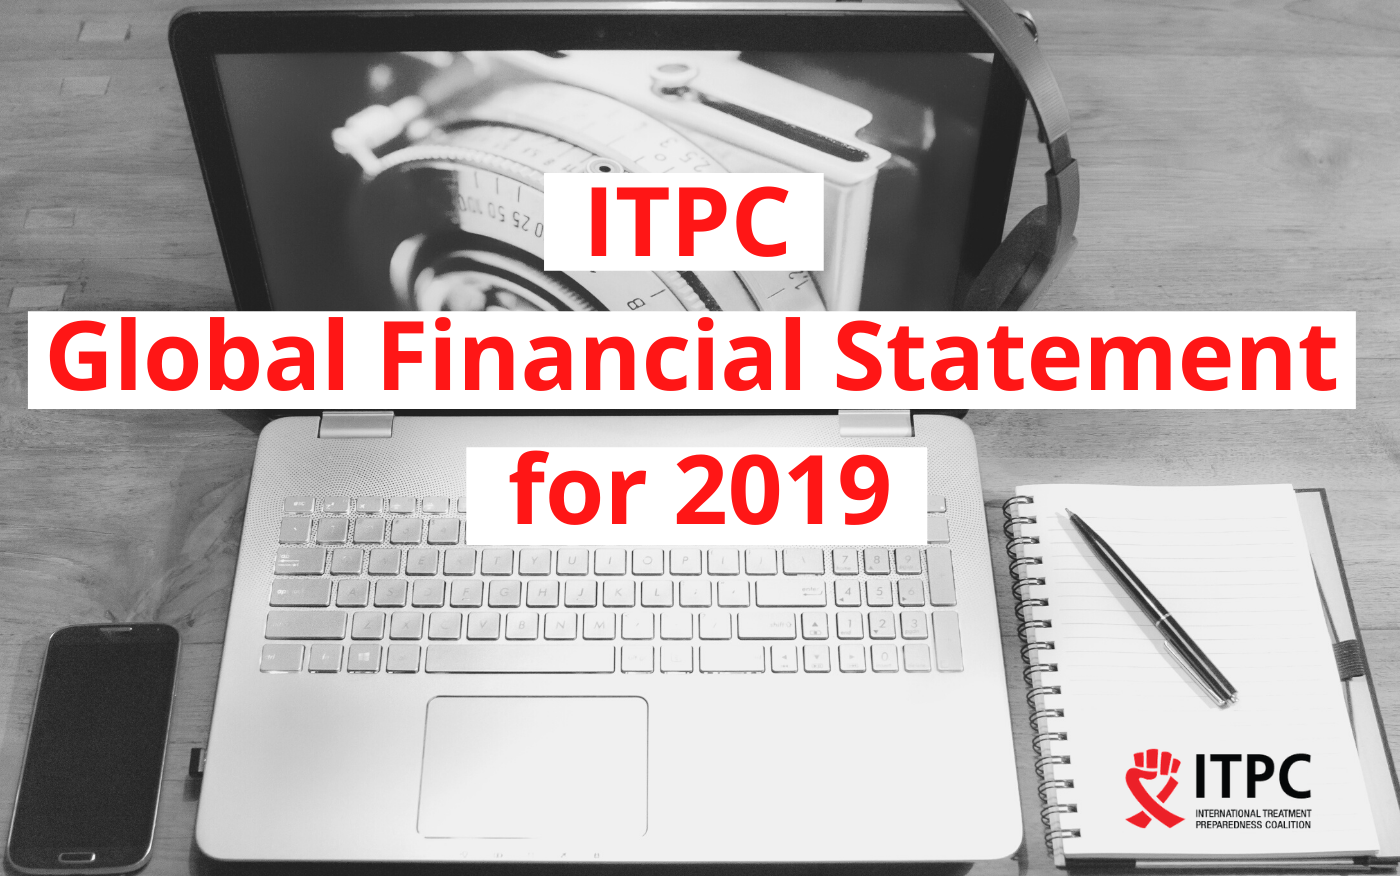 itpc global financial statement 2019